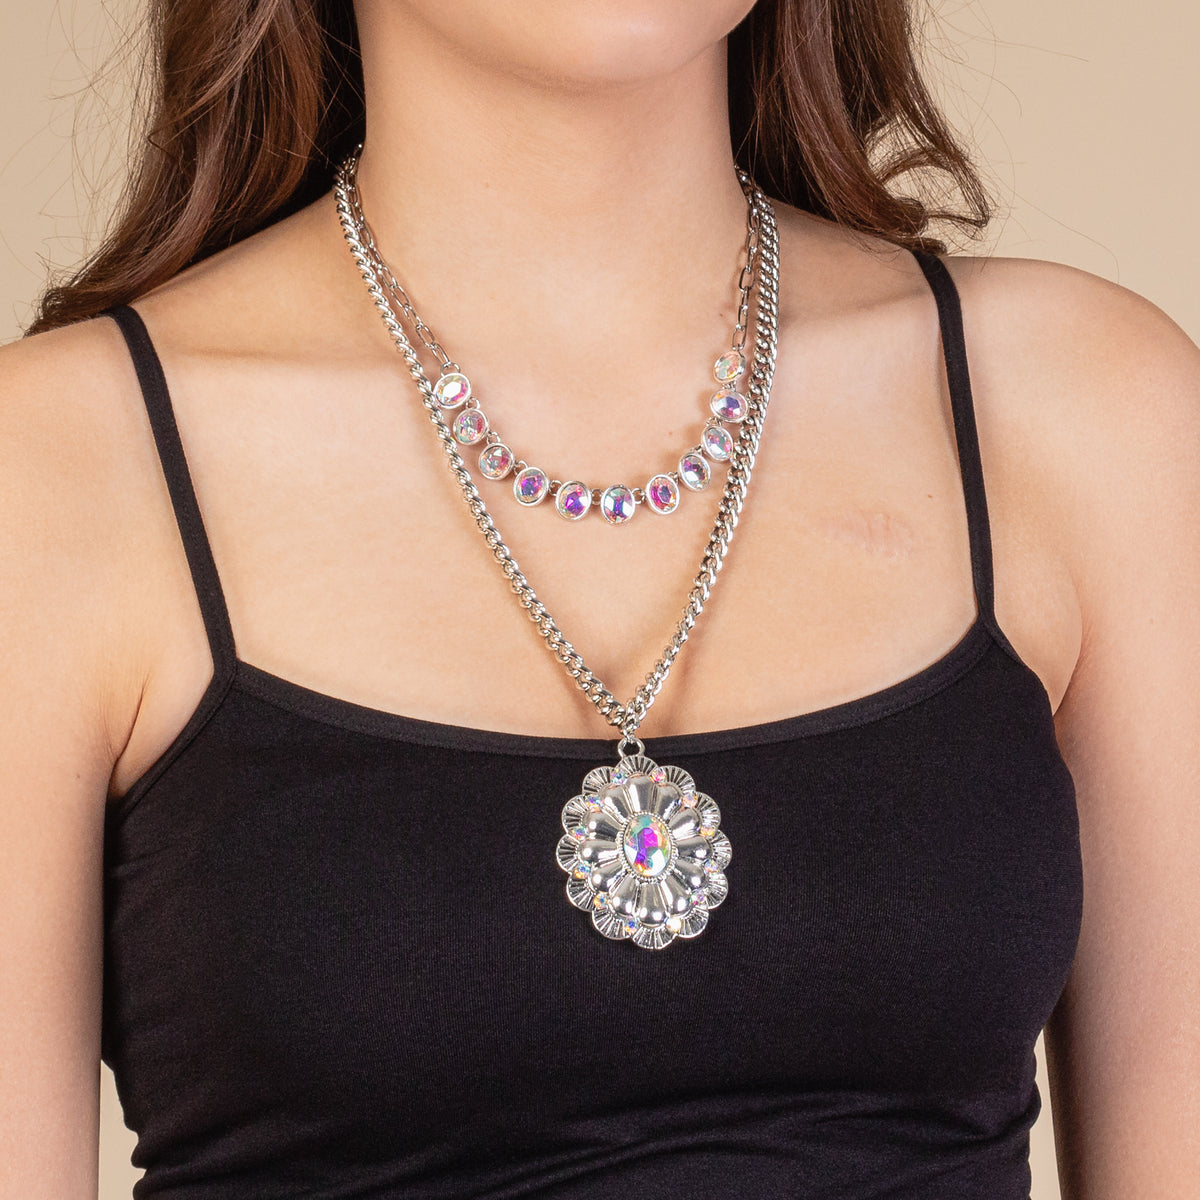 1150 - Layered Squash Blossom Necklace - Silver & AB